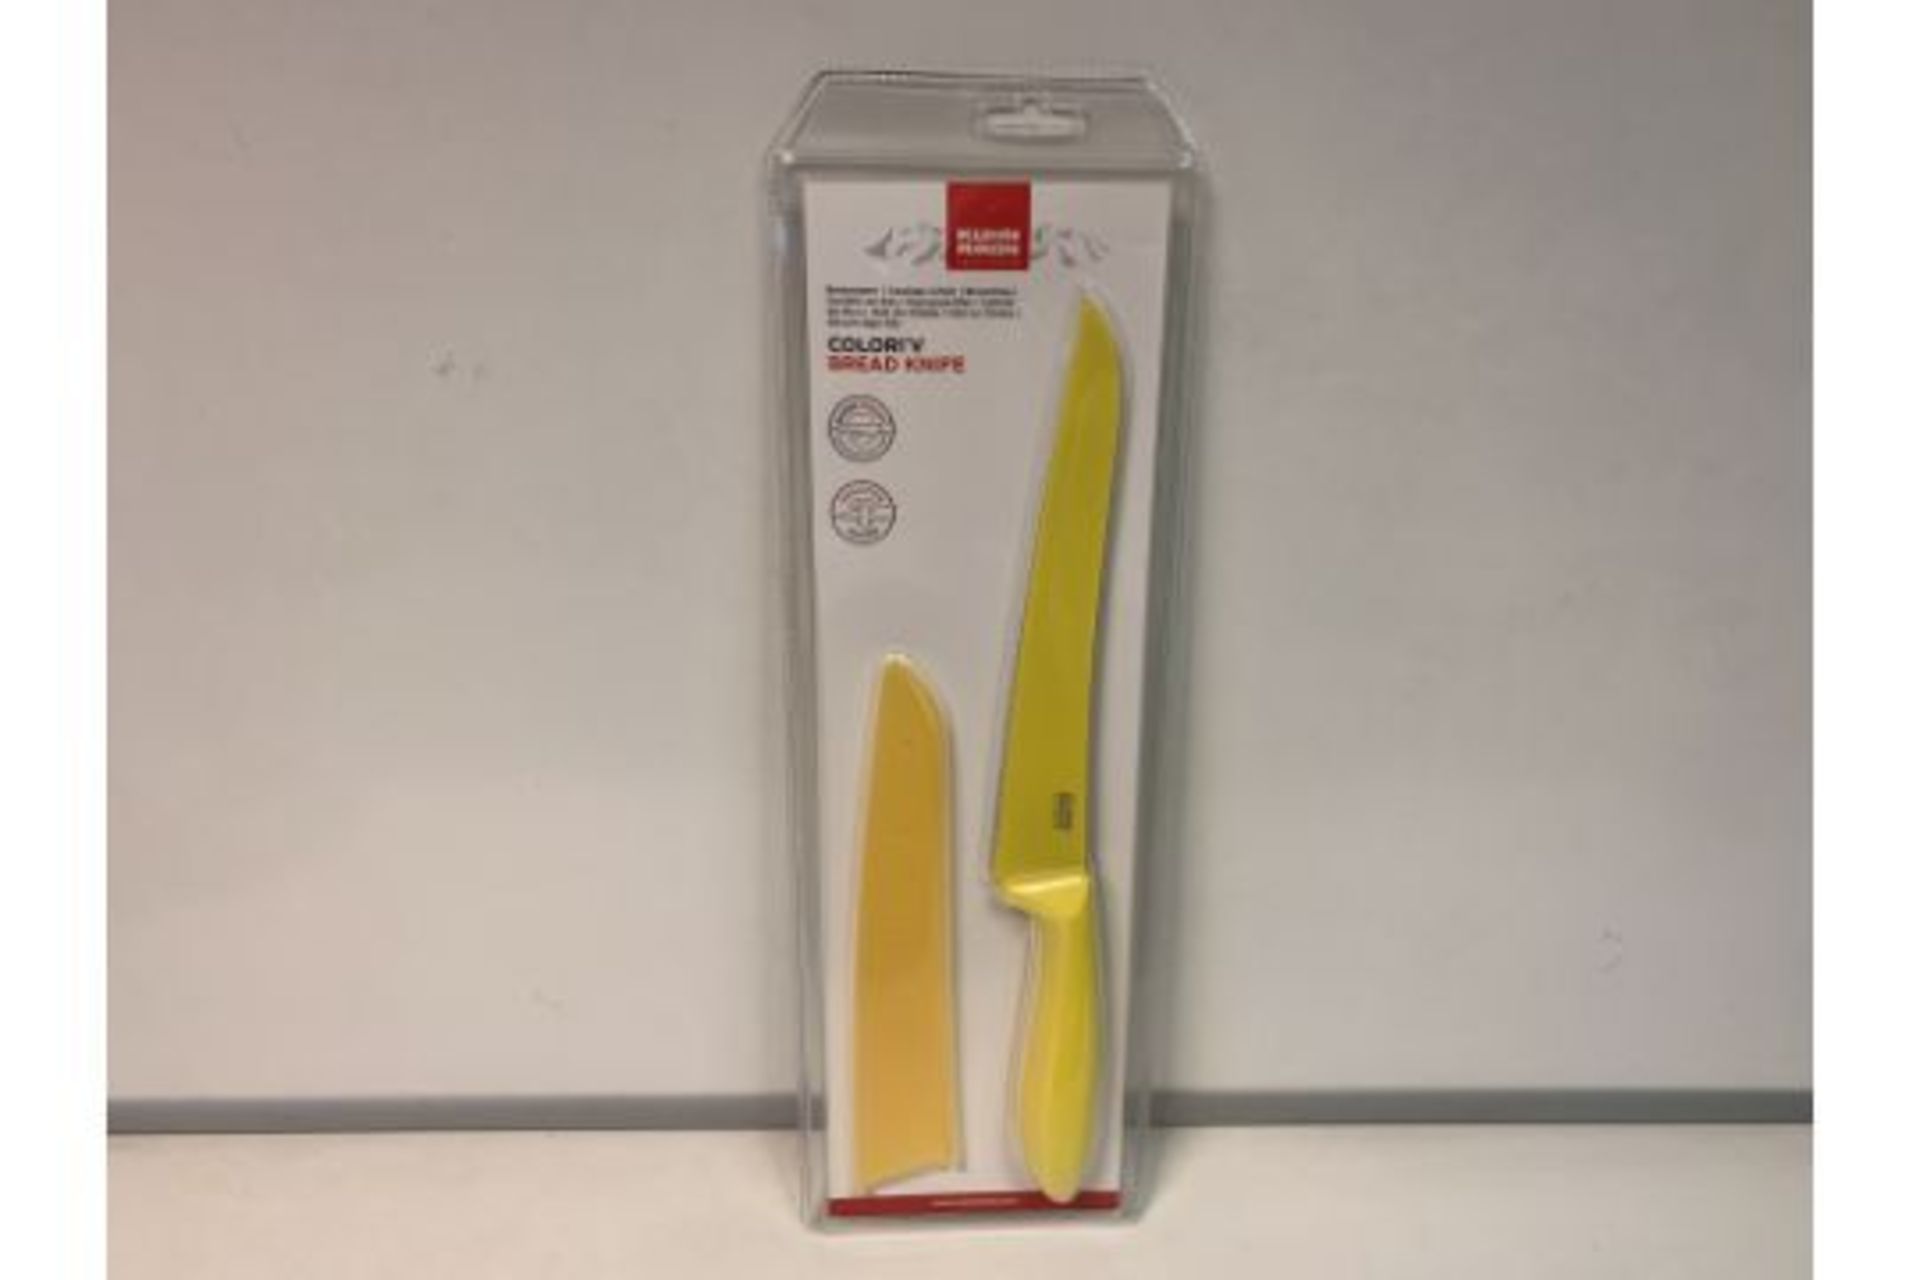 24 X NEW PACKAGED KUHN RIKON SWISS DESIGN BREAD KNIFES (ROW10) 18+ ONLY - ID MAY BE REQUIRED